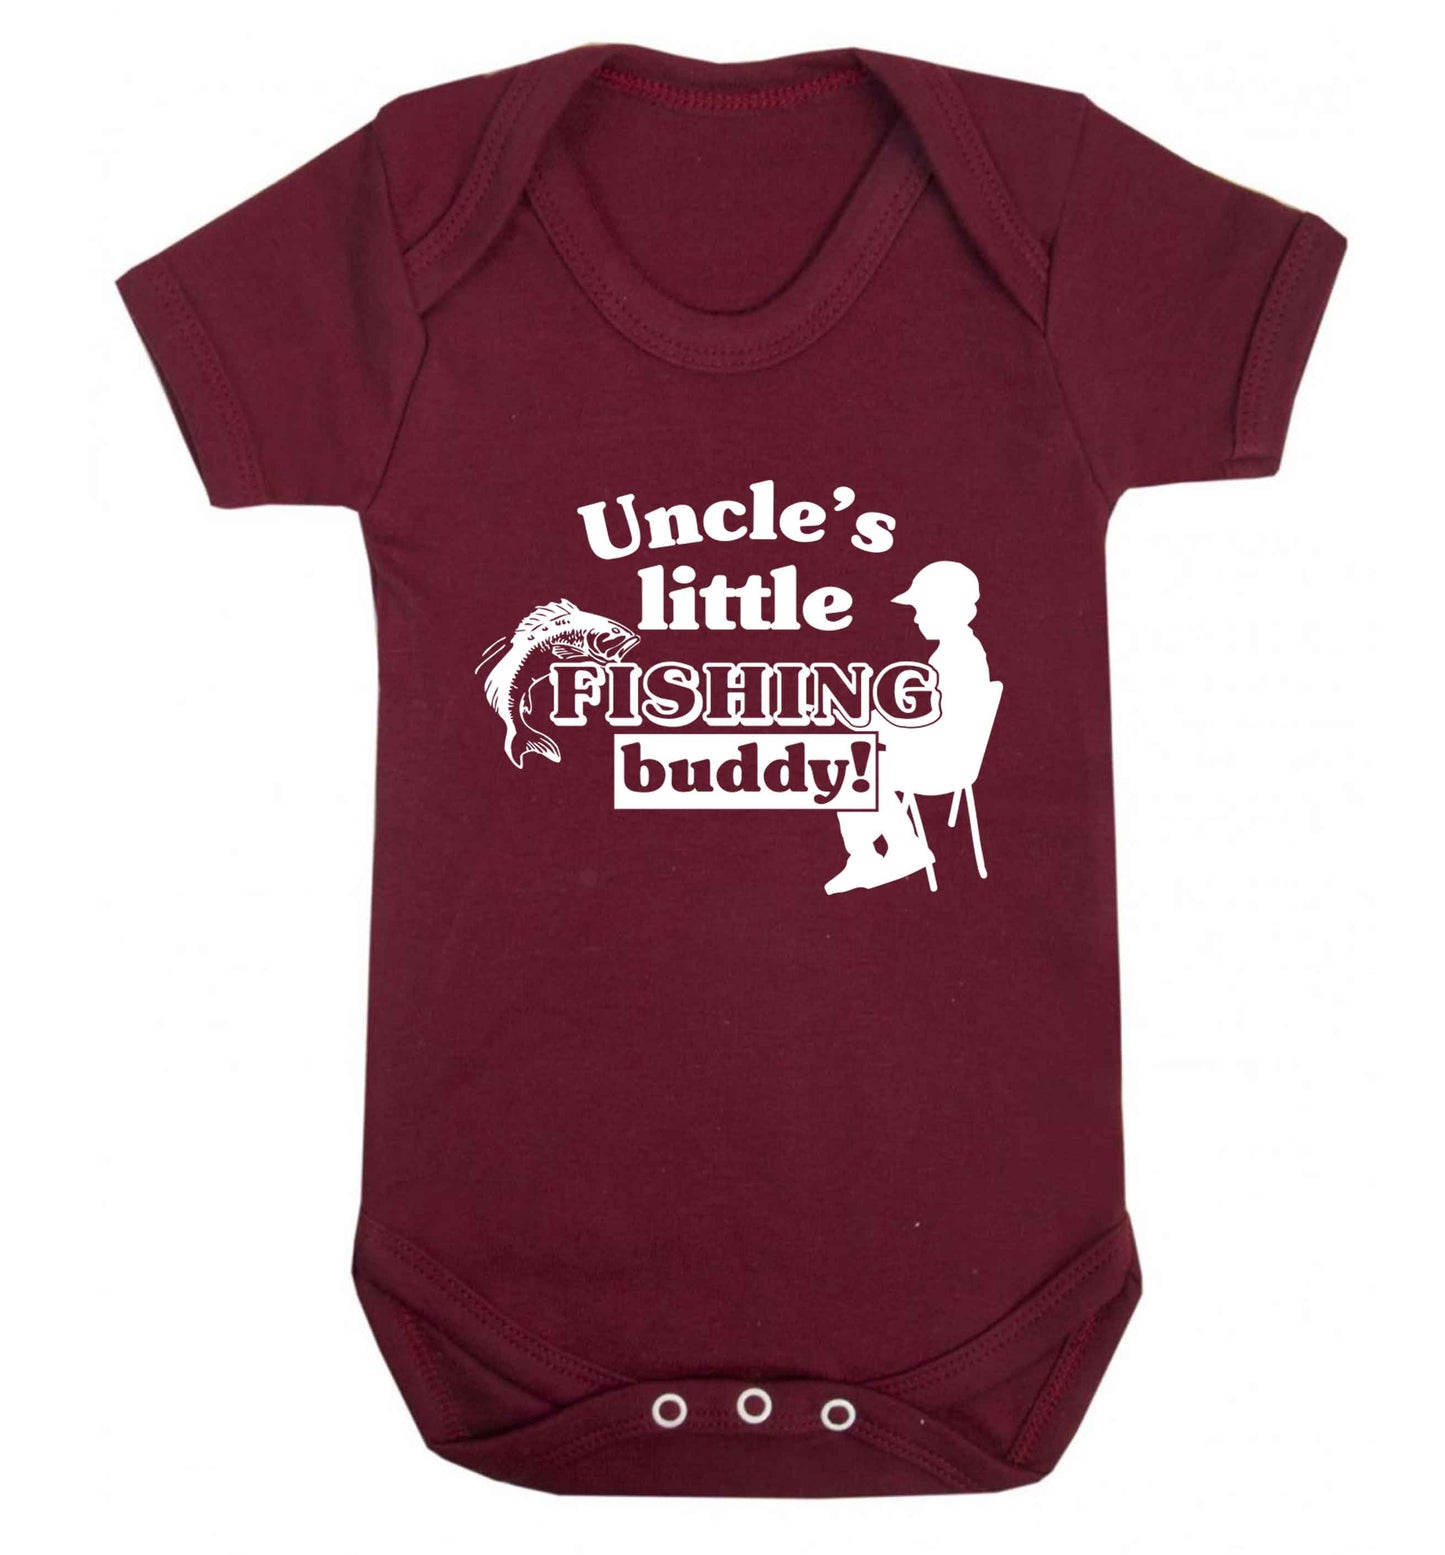 Uncle's little fishing buddy Baby Vest maroon 18-24 months